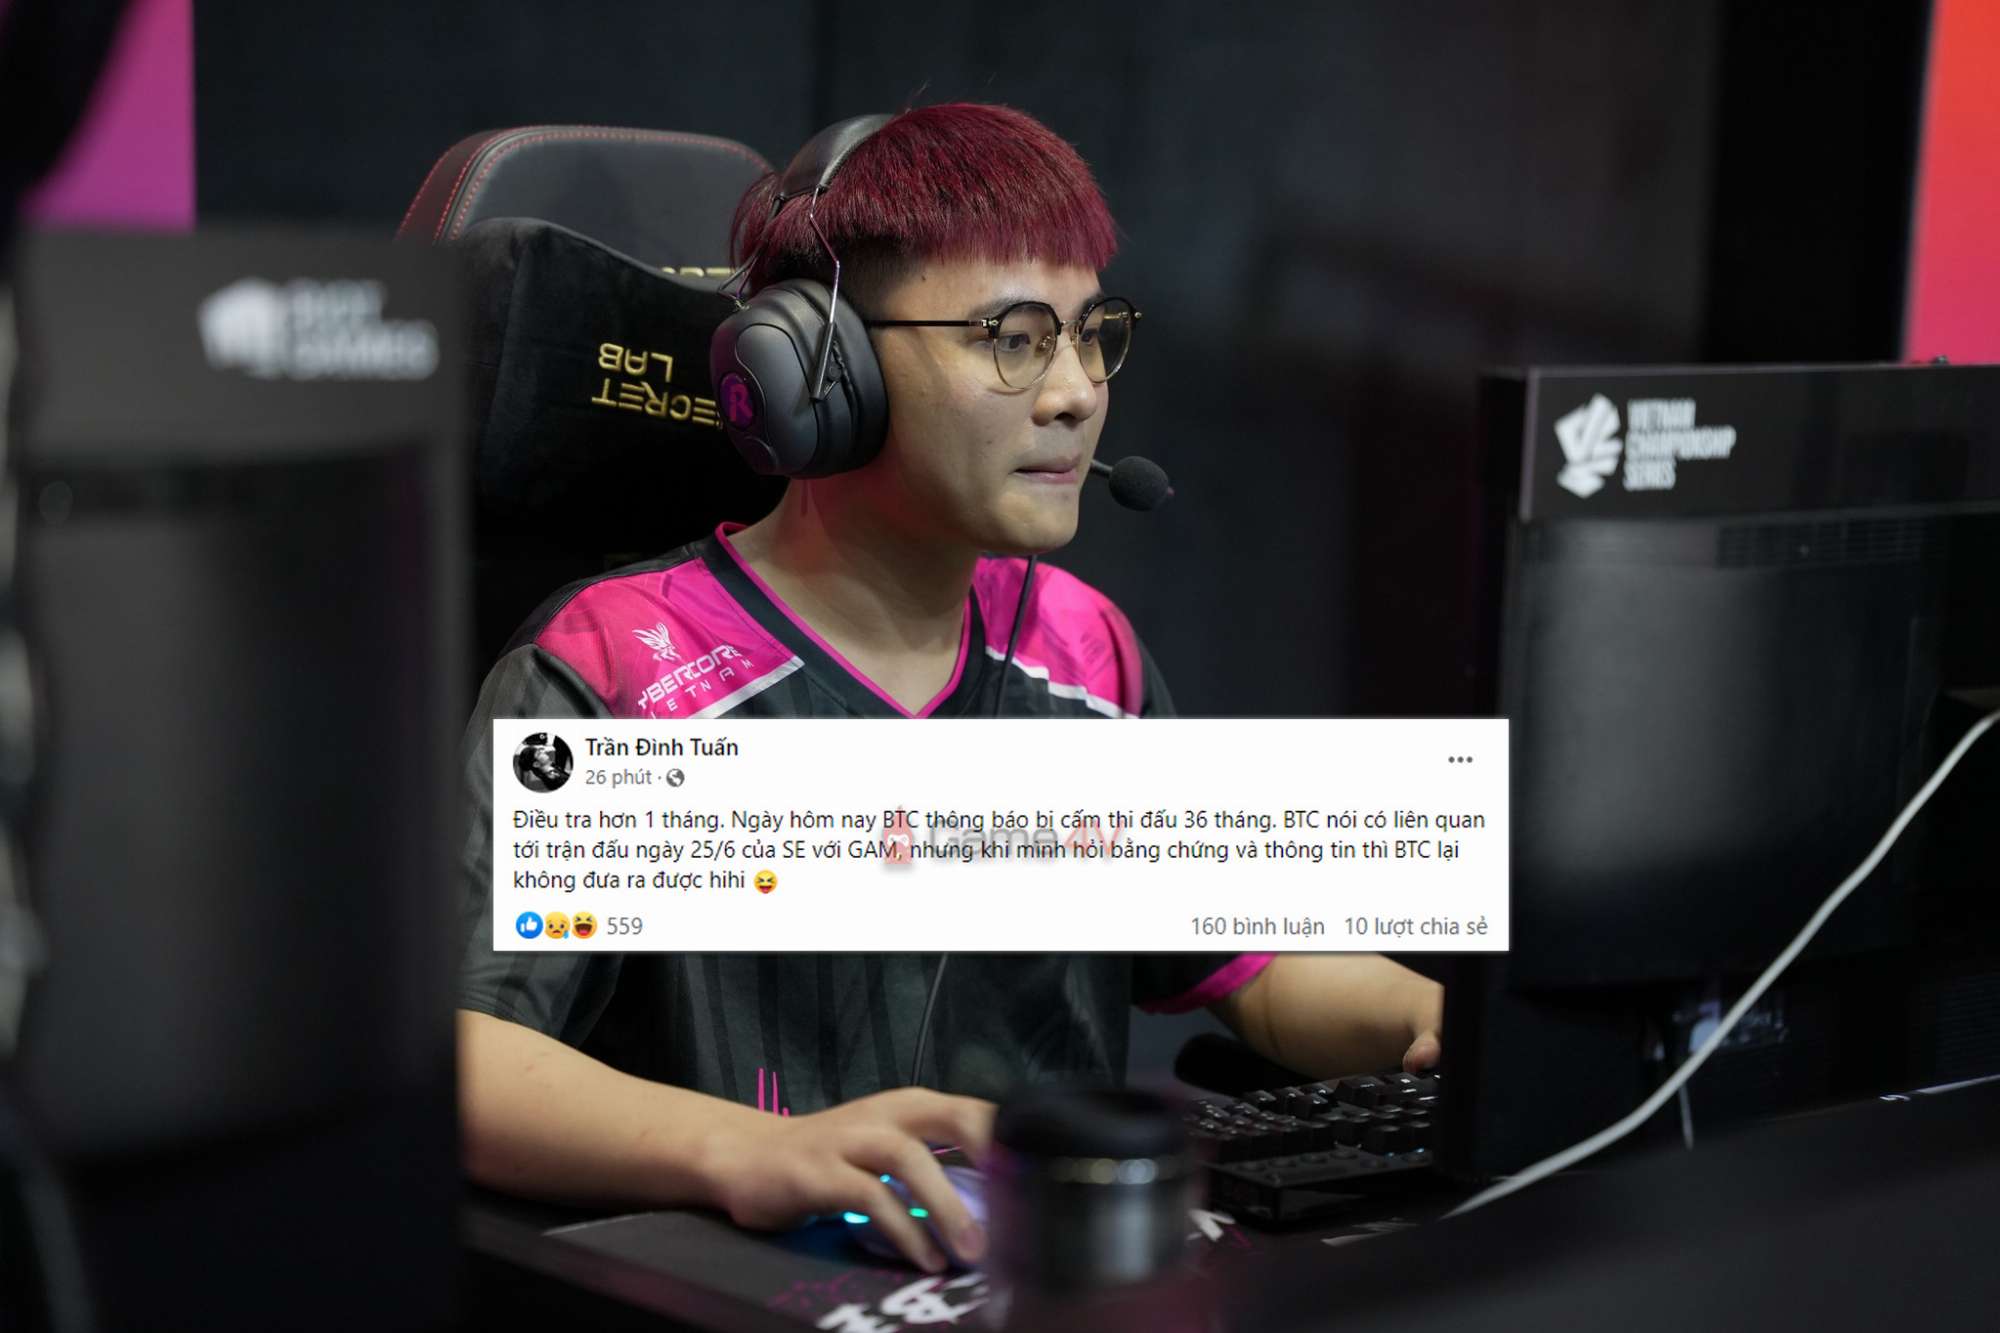 Nper shared about the shocking penalty of LoL in Vietnam.